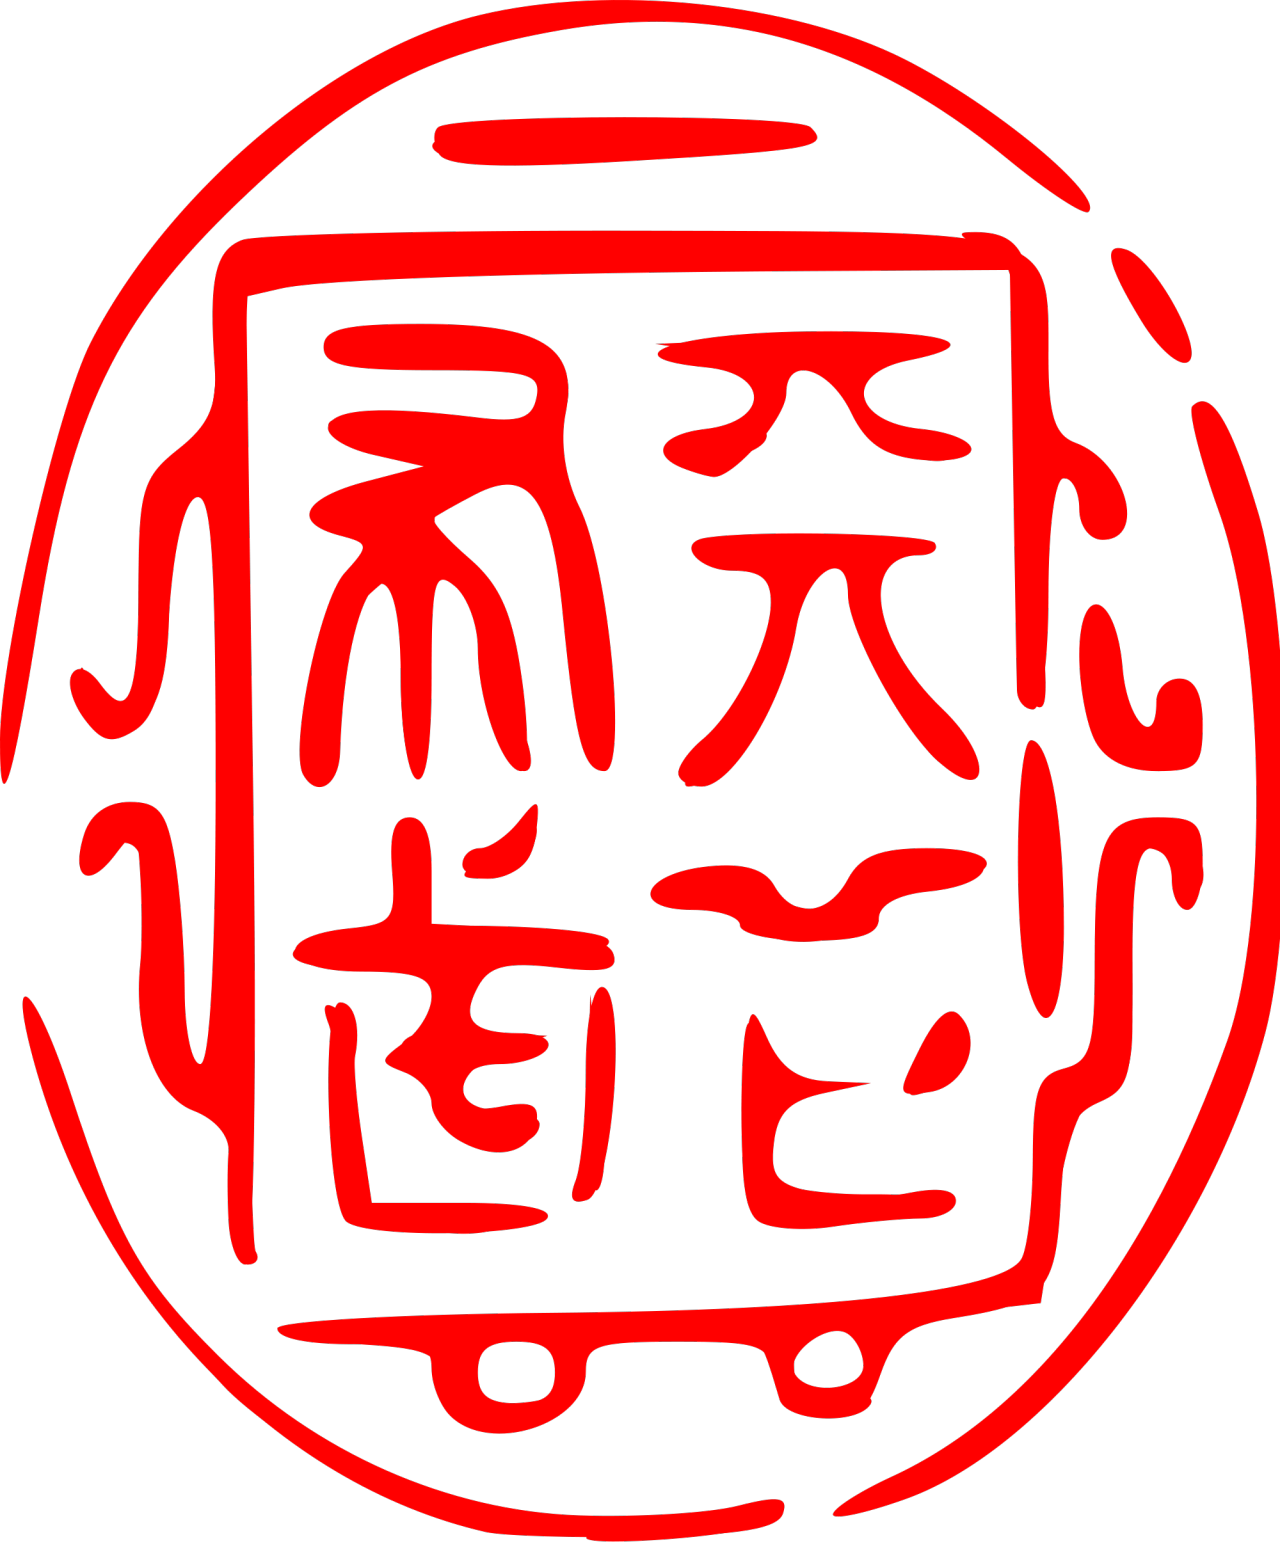 The Oda Family All The Crests Symbols Associated With Nobunaga